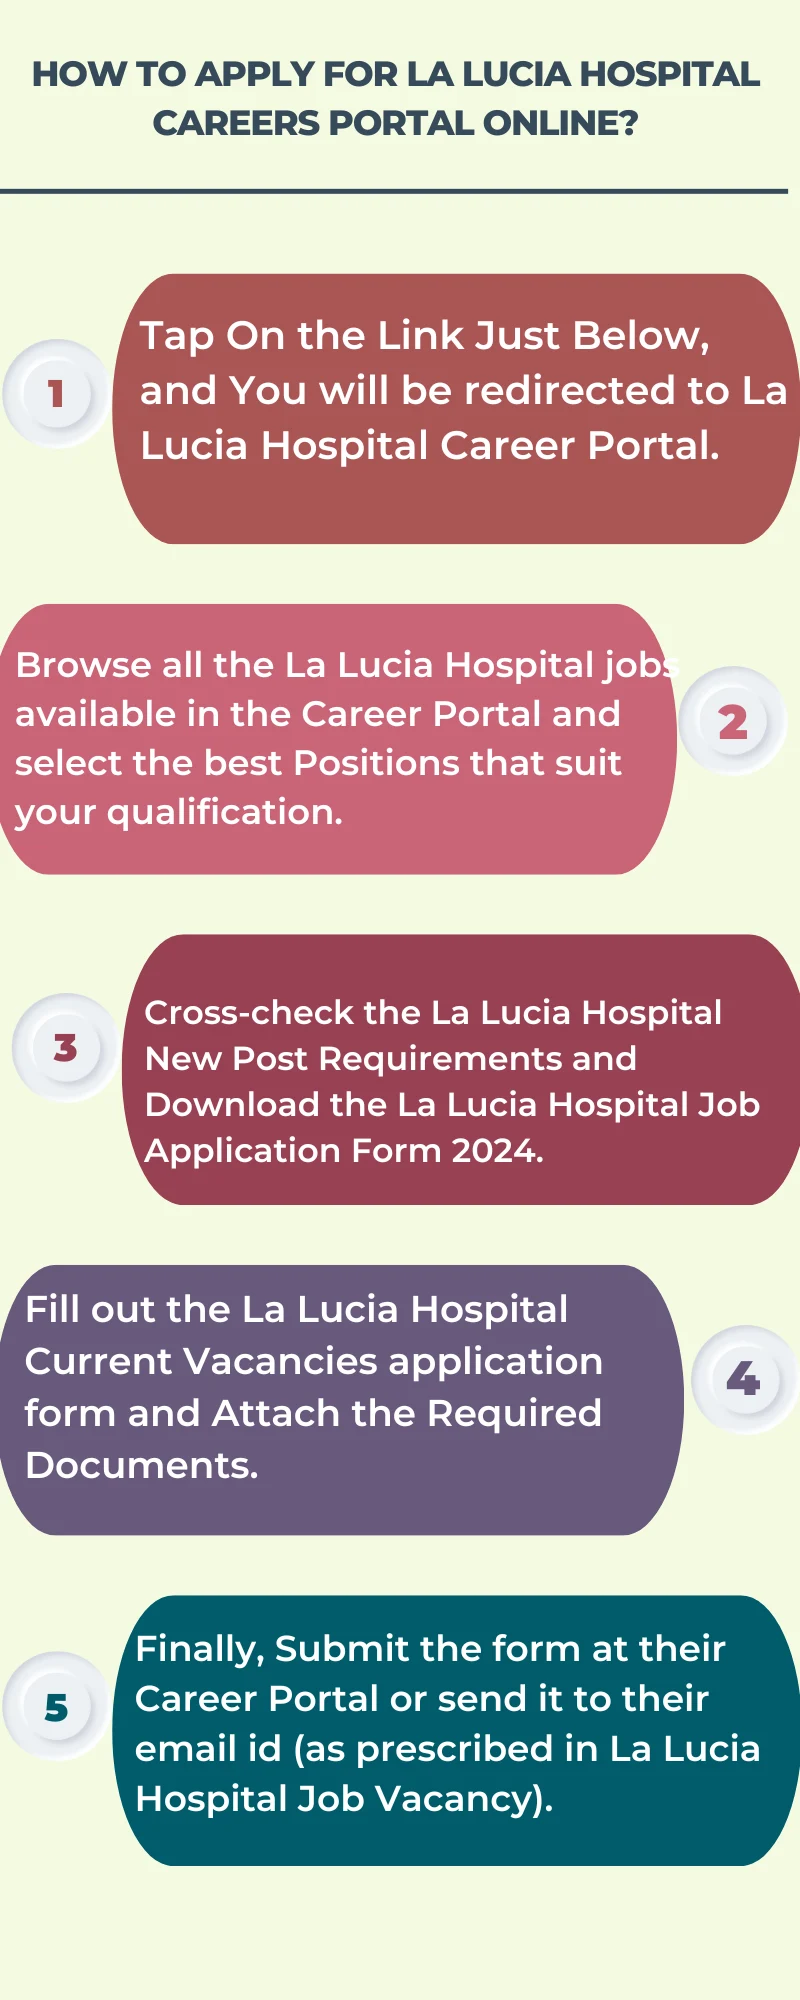 How To Apply for La Lucia Hospital Careers Portal Online?